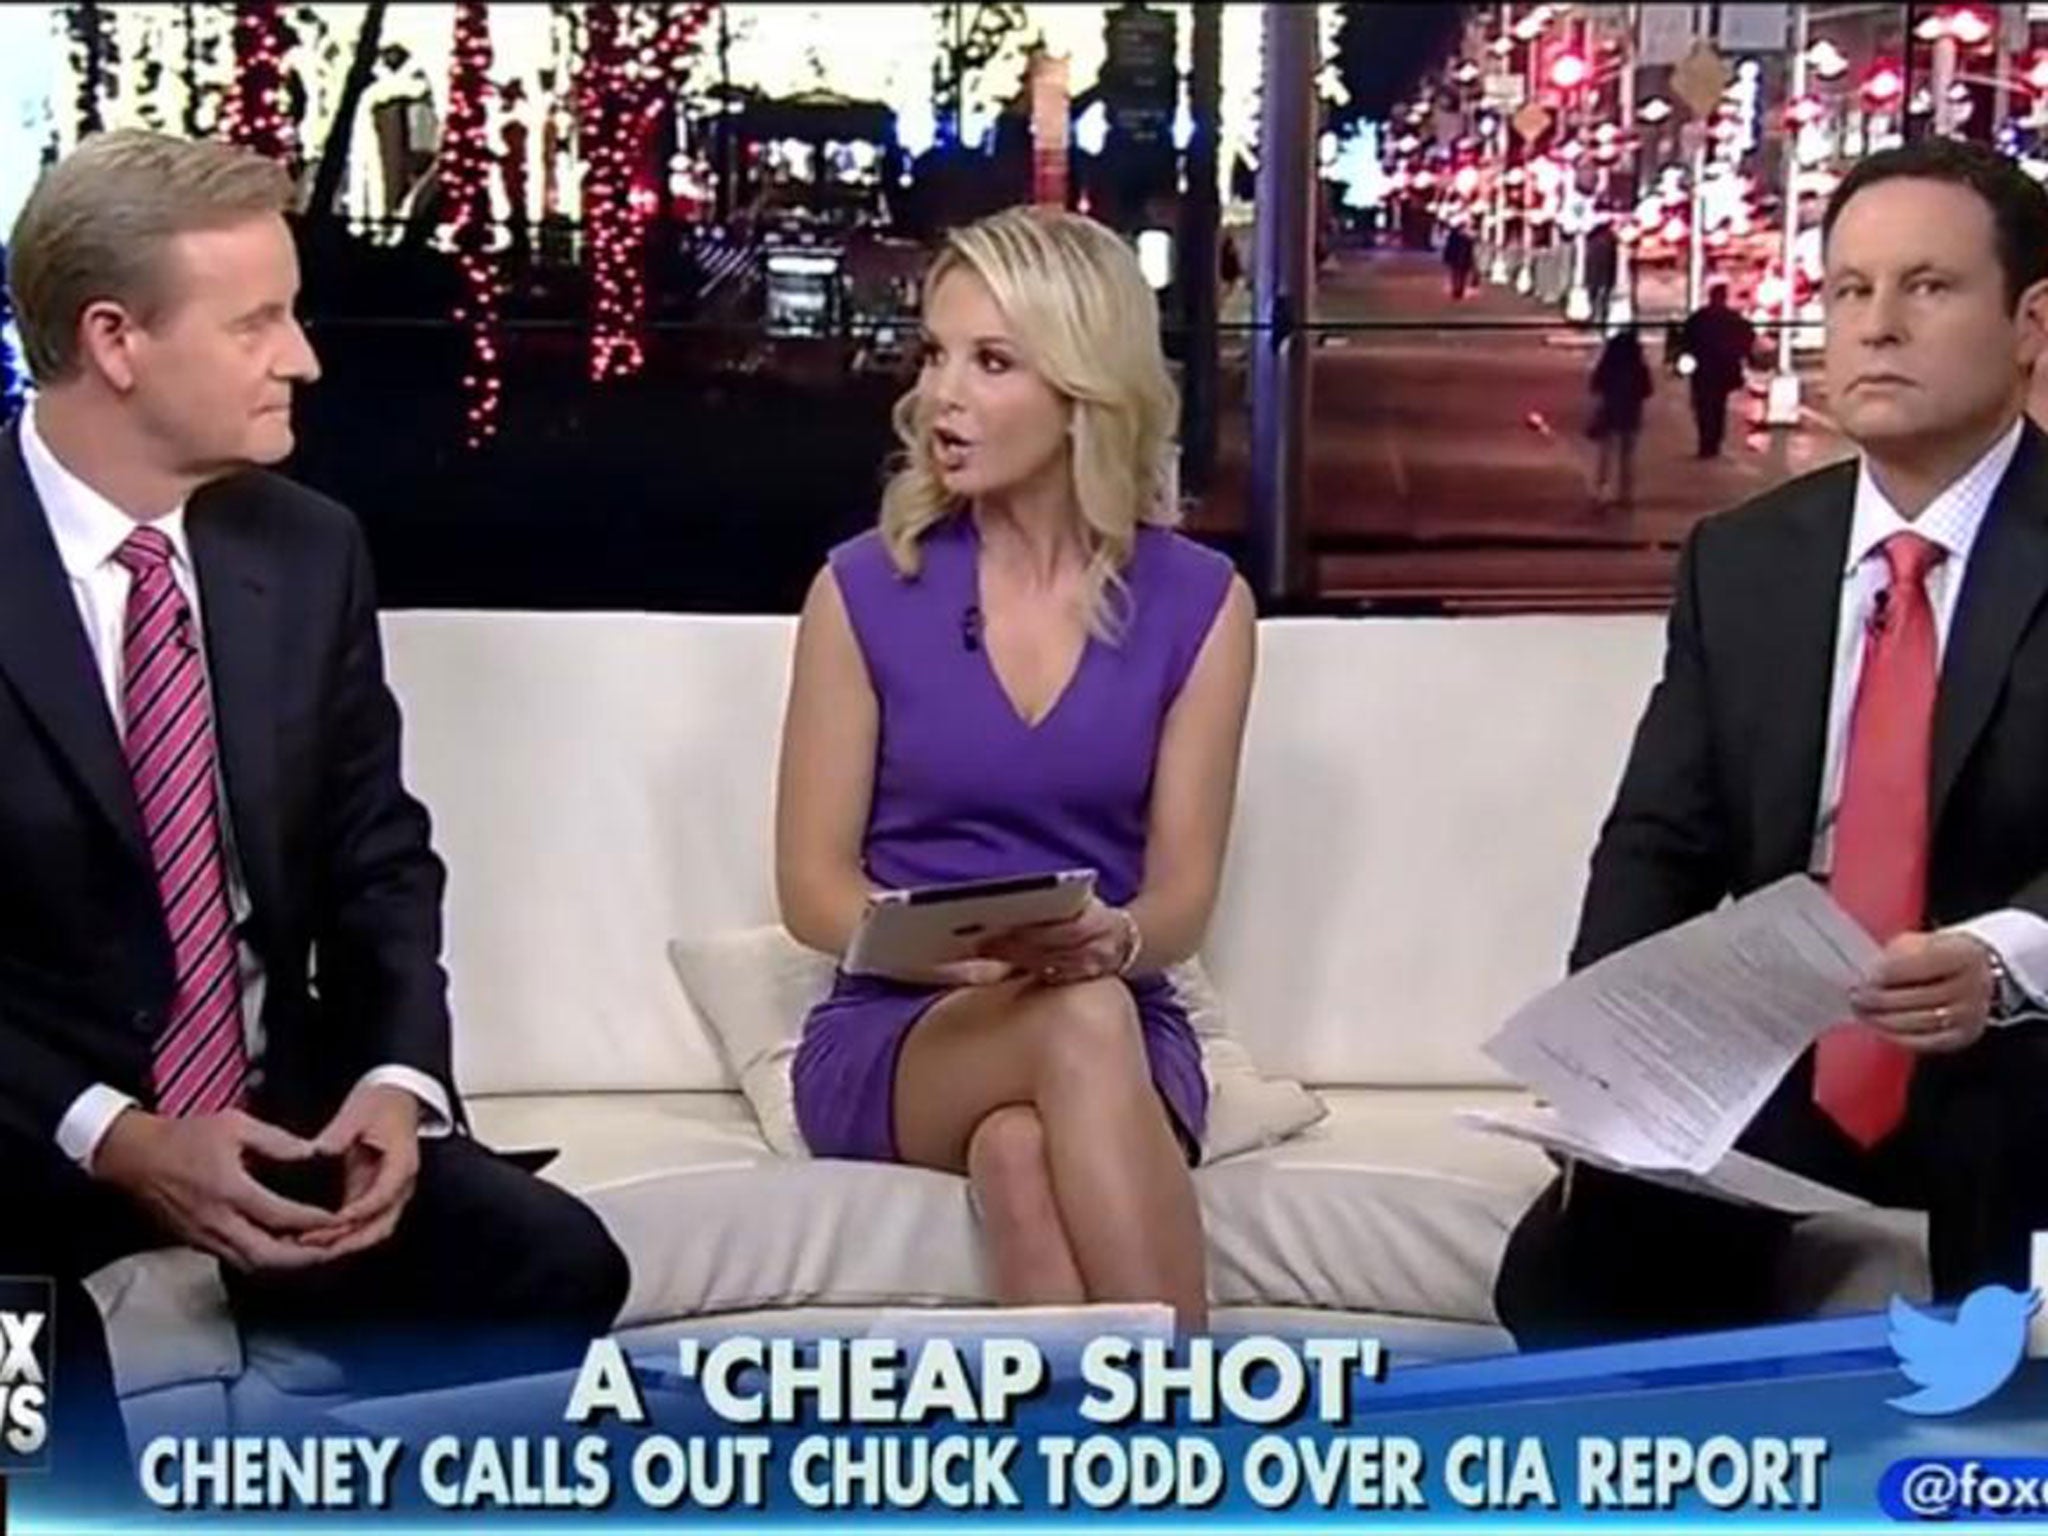 Fox & Friends co-host Elisabeth Hasselbeck made the remarks during a segment on the 16-hour siege